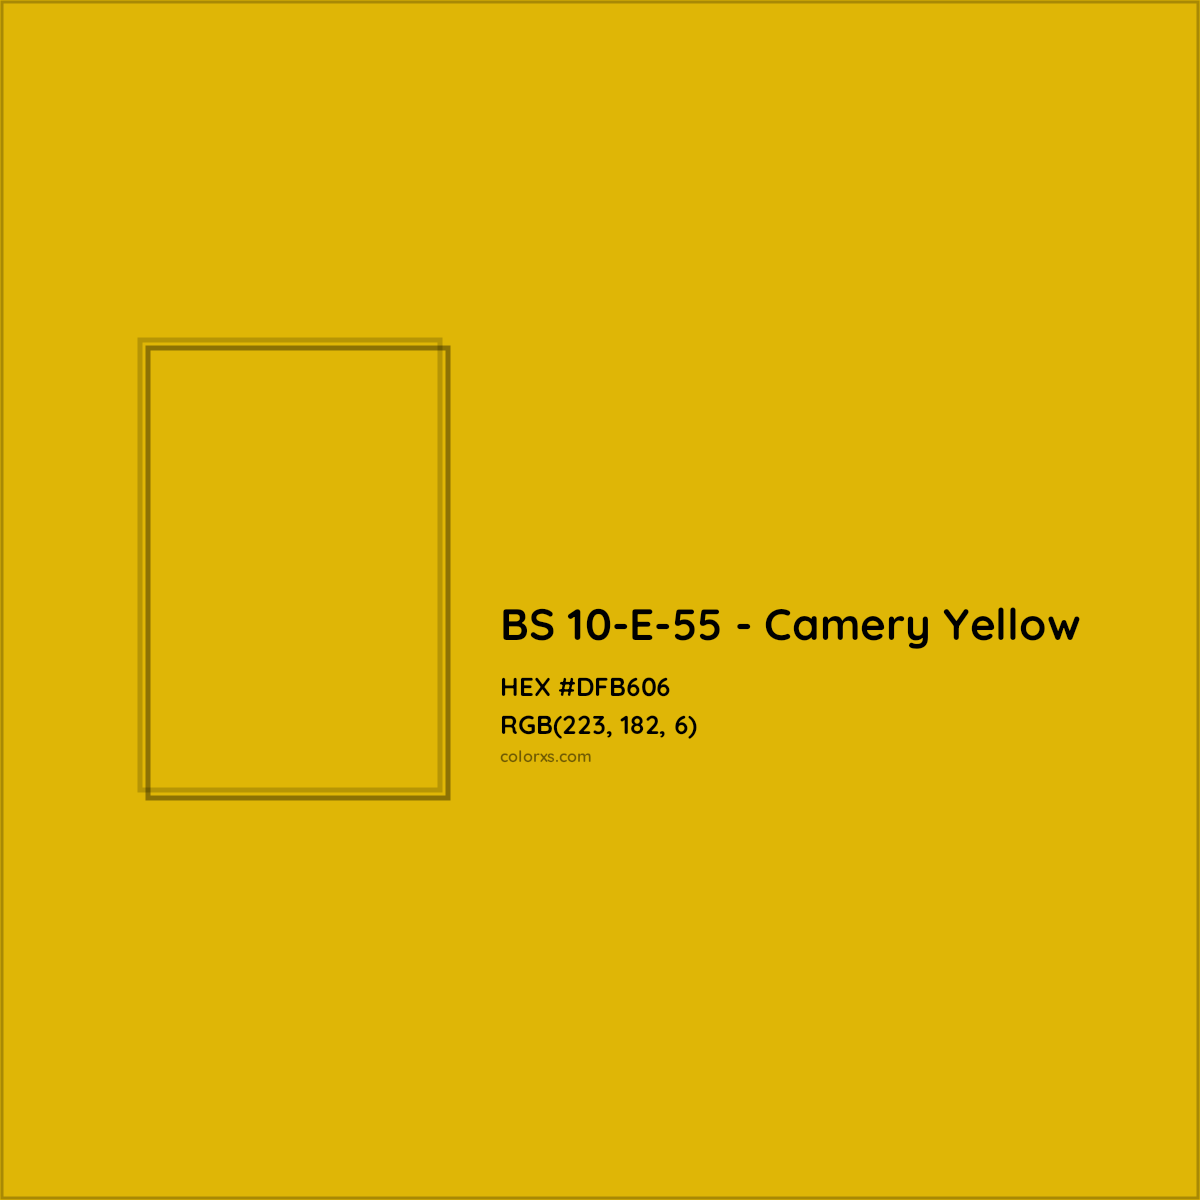 HEX #DFB606 BS 10-E-55 - Camery Yellow CMS British Standard 4800 - Color Code